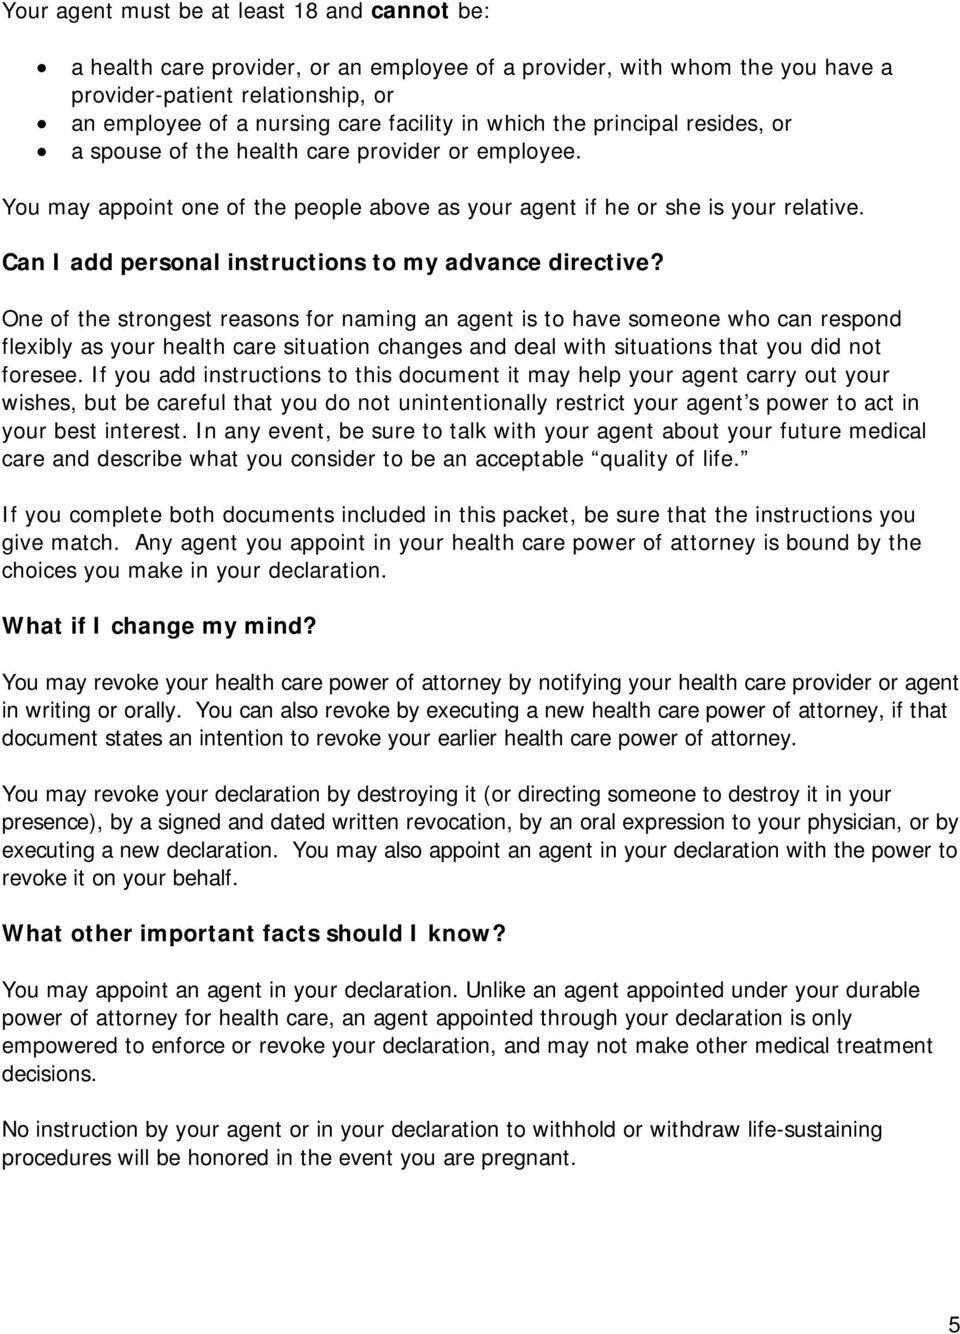 Can I add personal instructions to my advance directive?